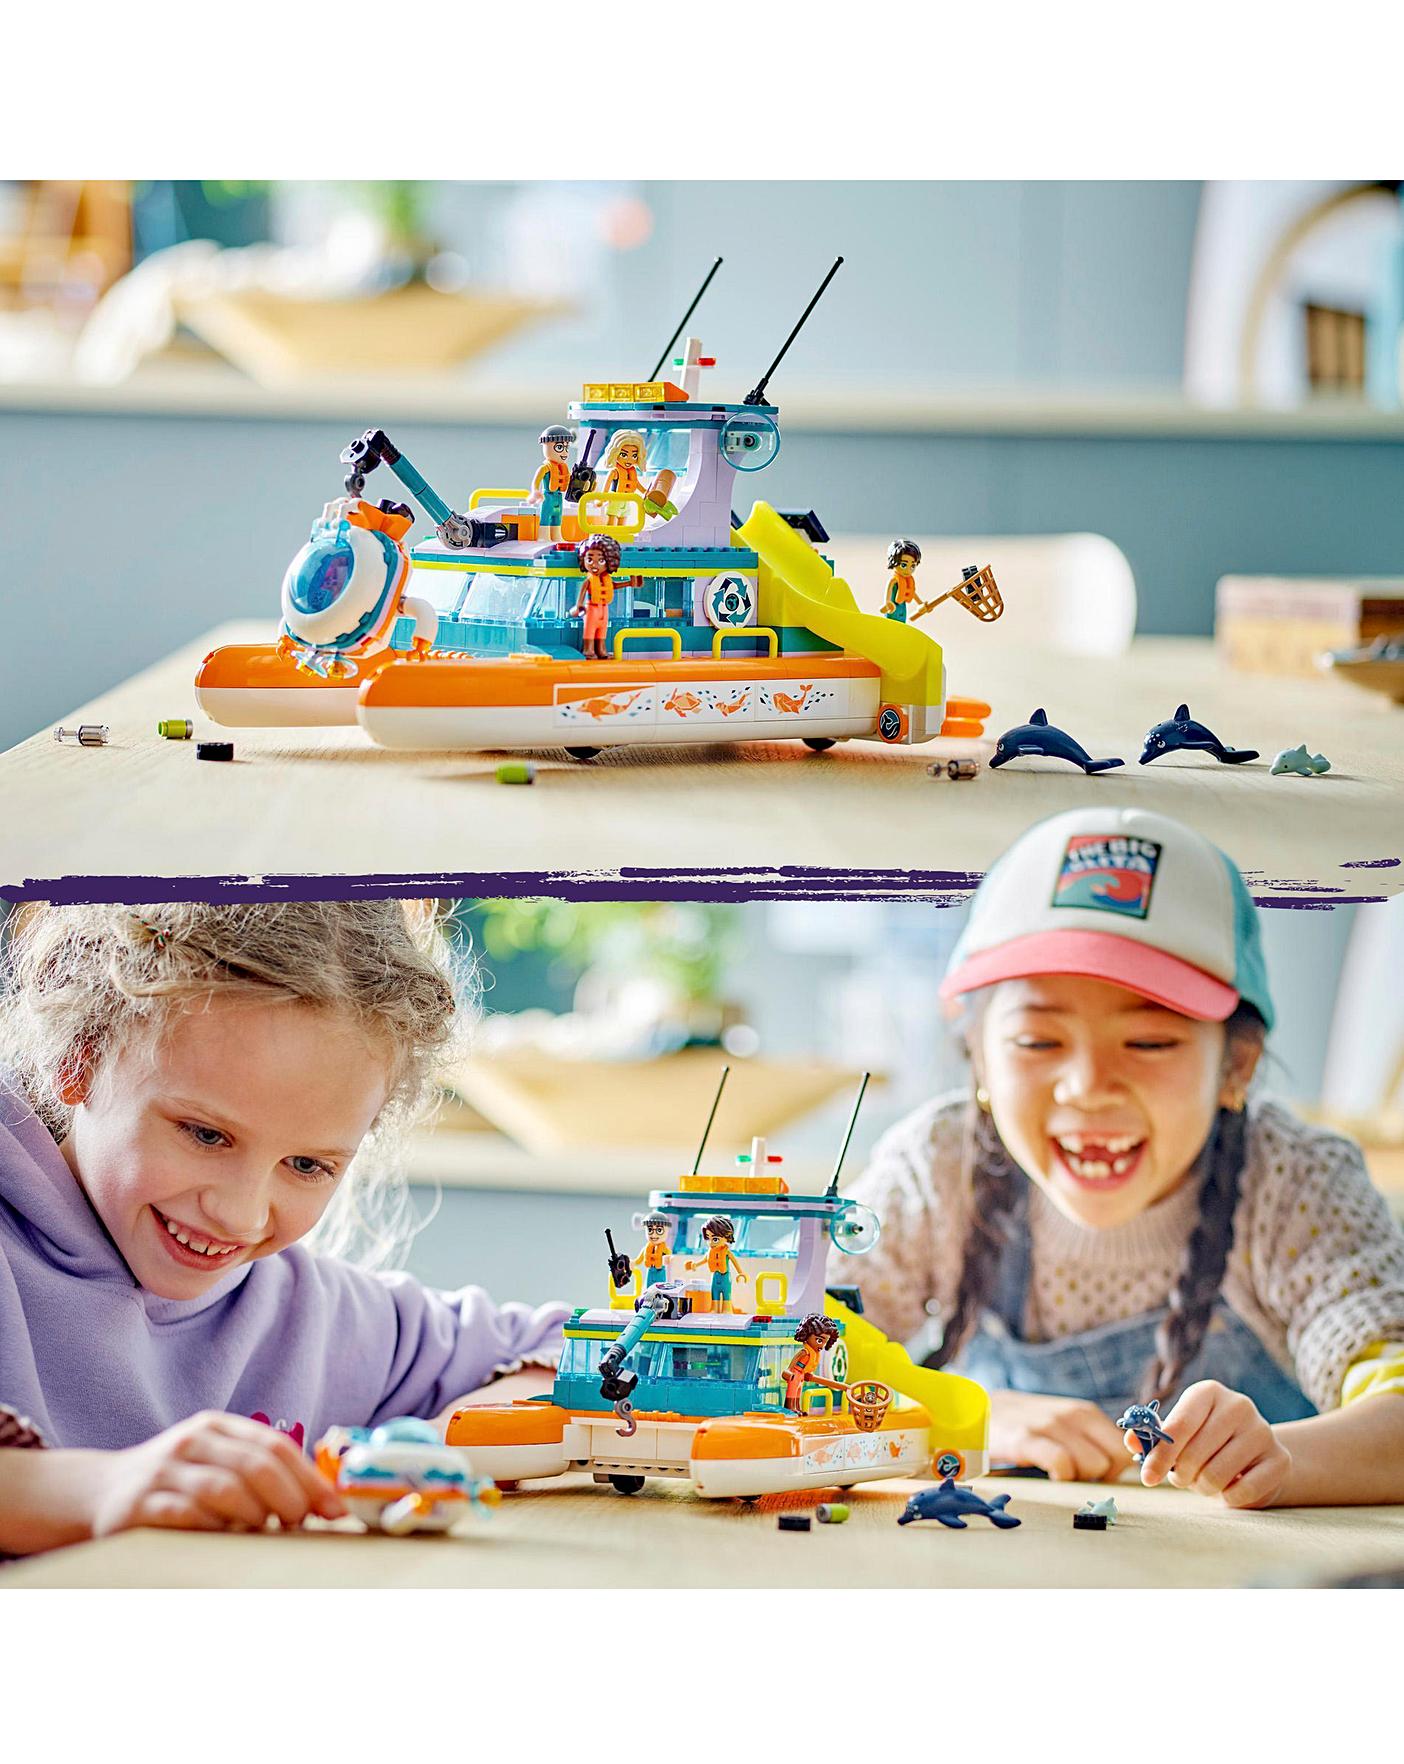 Sea Rescue Boat 41734 | Friends | Buy online at the Official LEGO® Shop US